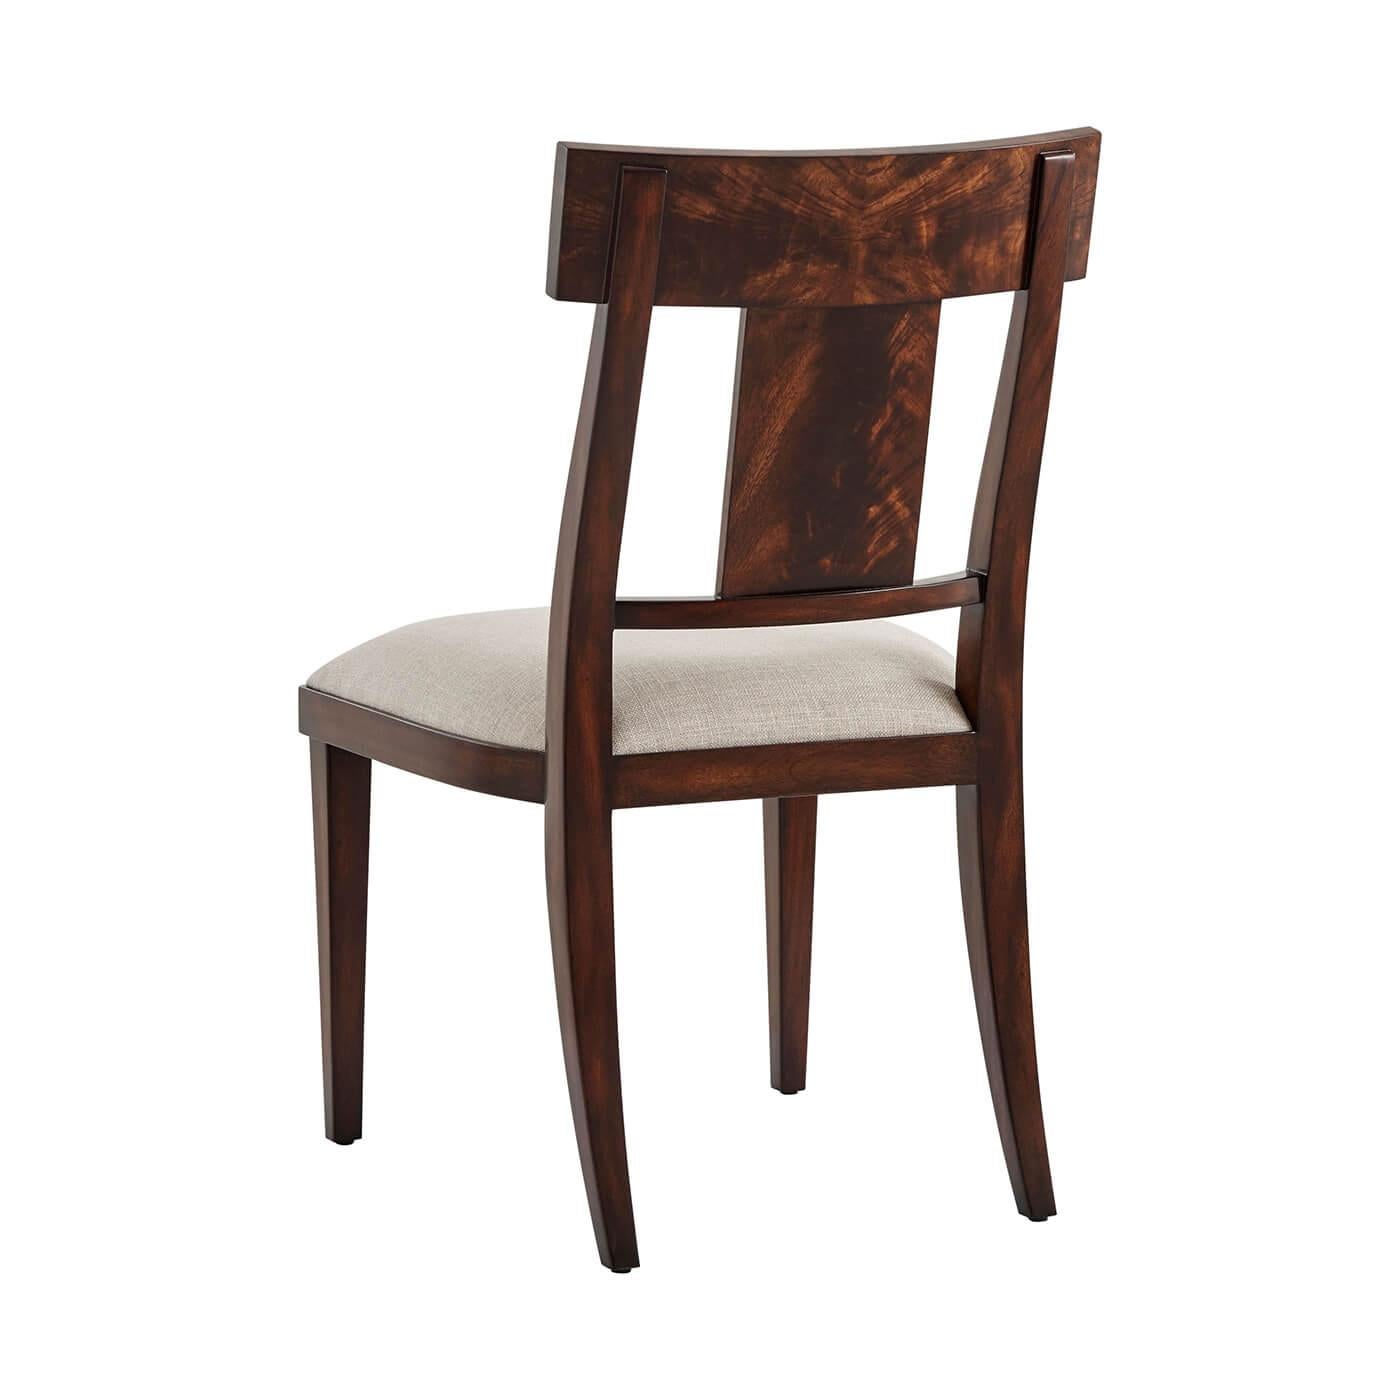 Modern Neo Classic mahogany side chair, the flame veneered bar top rail and solid splat above an upholstered seat, on square tapering legs.
Dimensions: 20